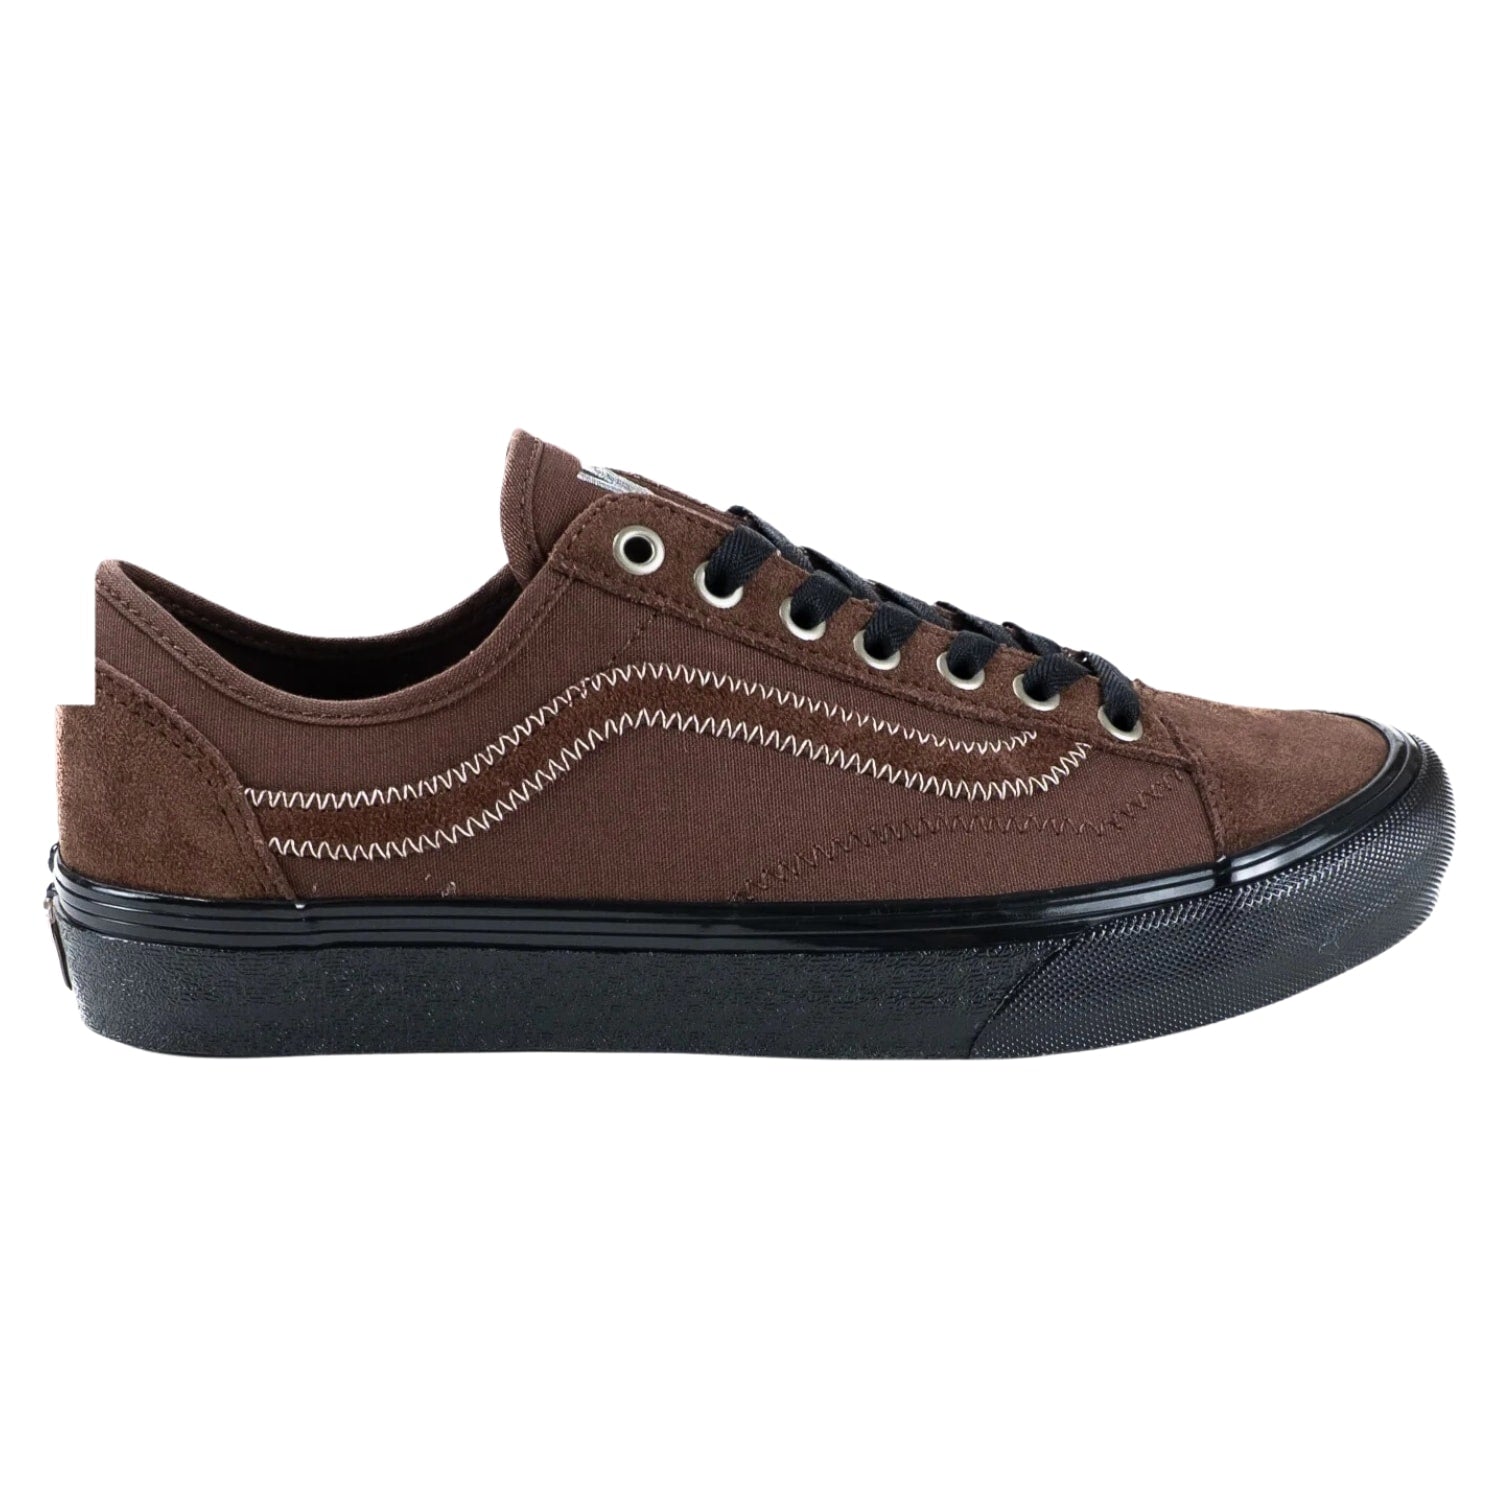 Vans Style 36 Decon VR3 Mikey February Shoes - Dark Brown - Mens Skate Shoes by Vans